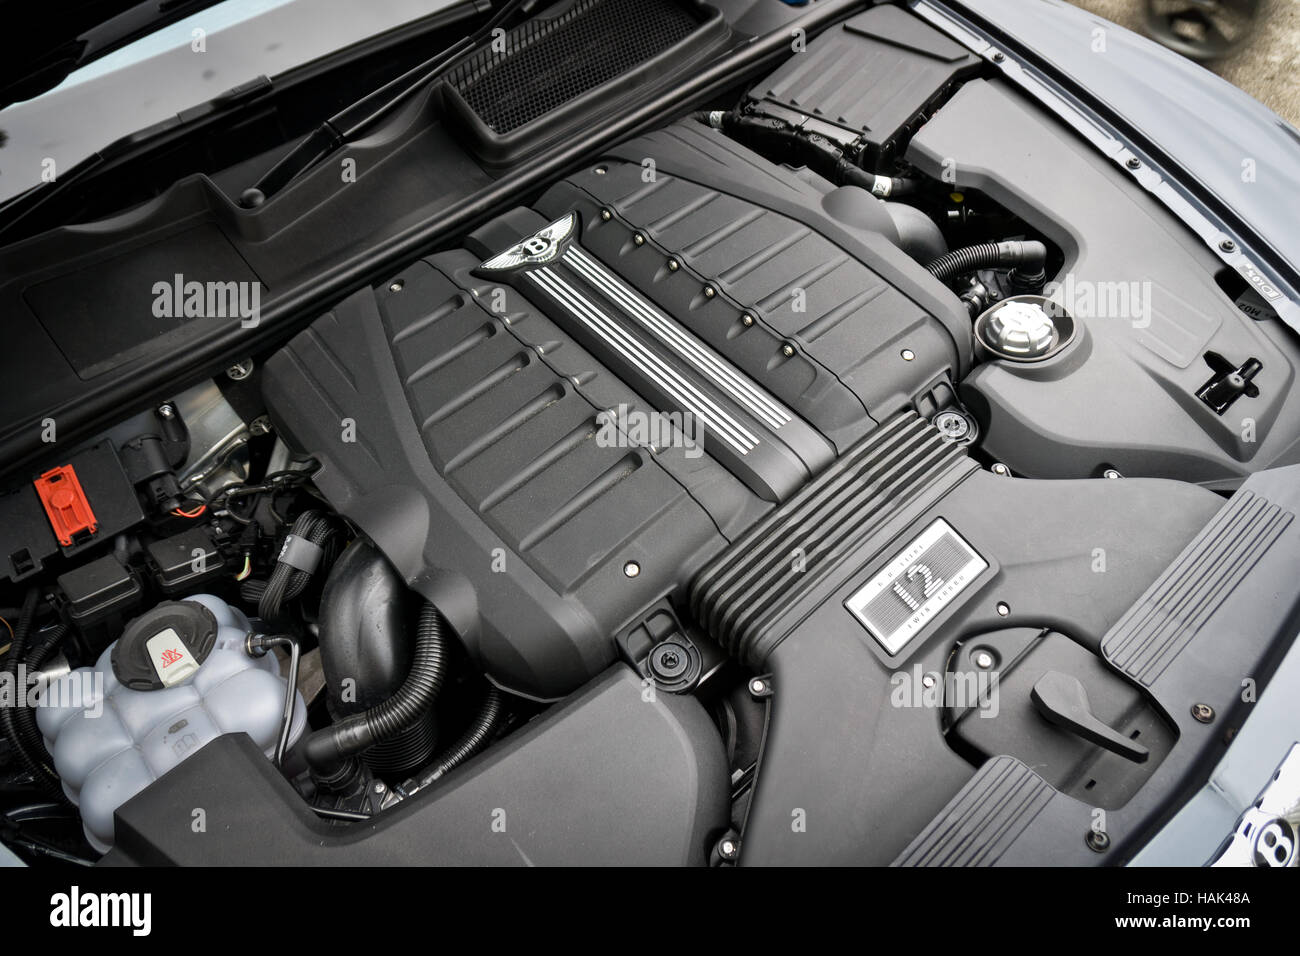 A8 is the last Audi to get the W12 engine, exclusive of Bentley